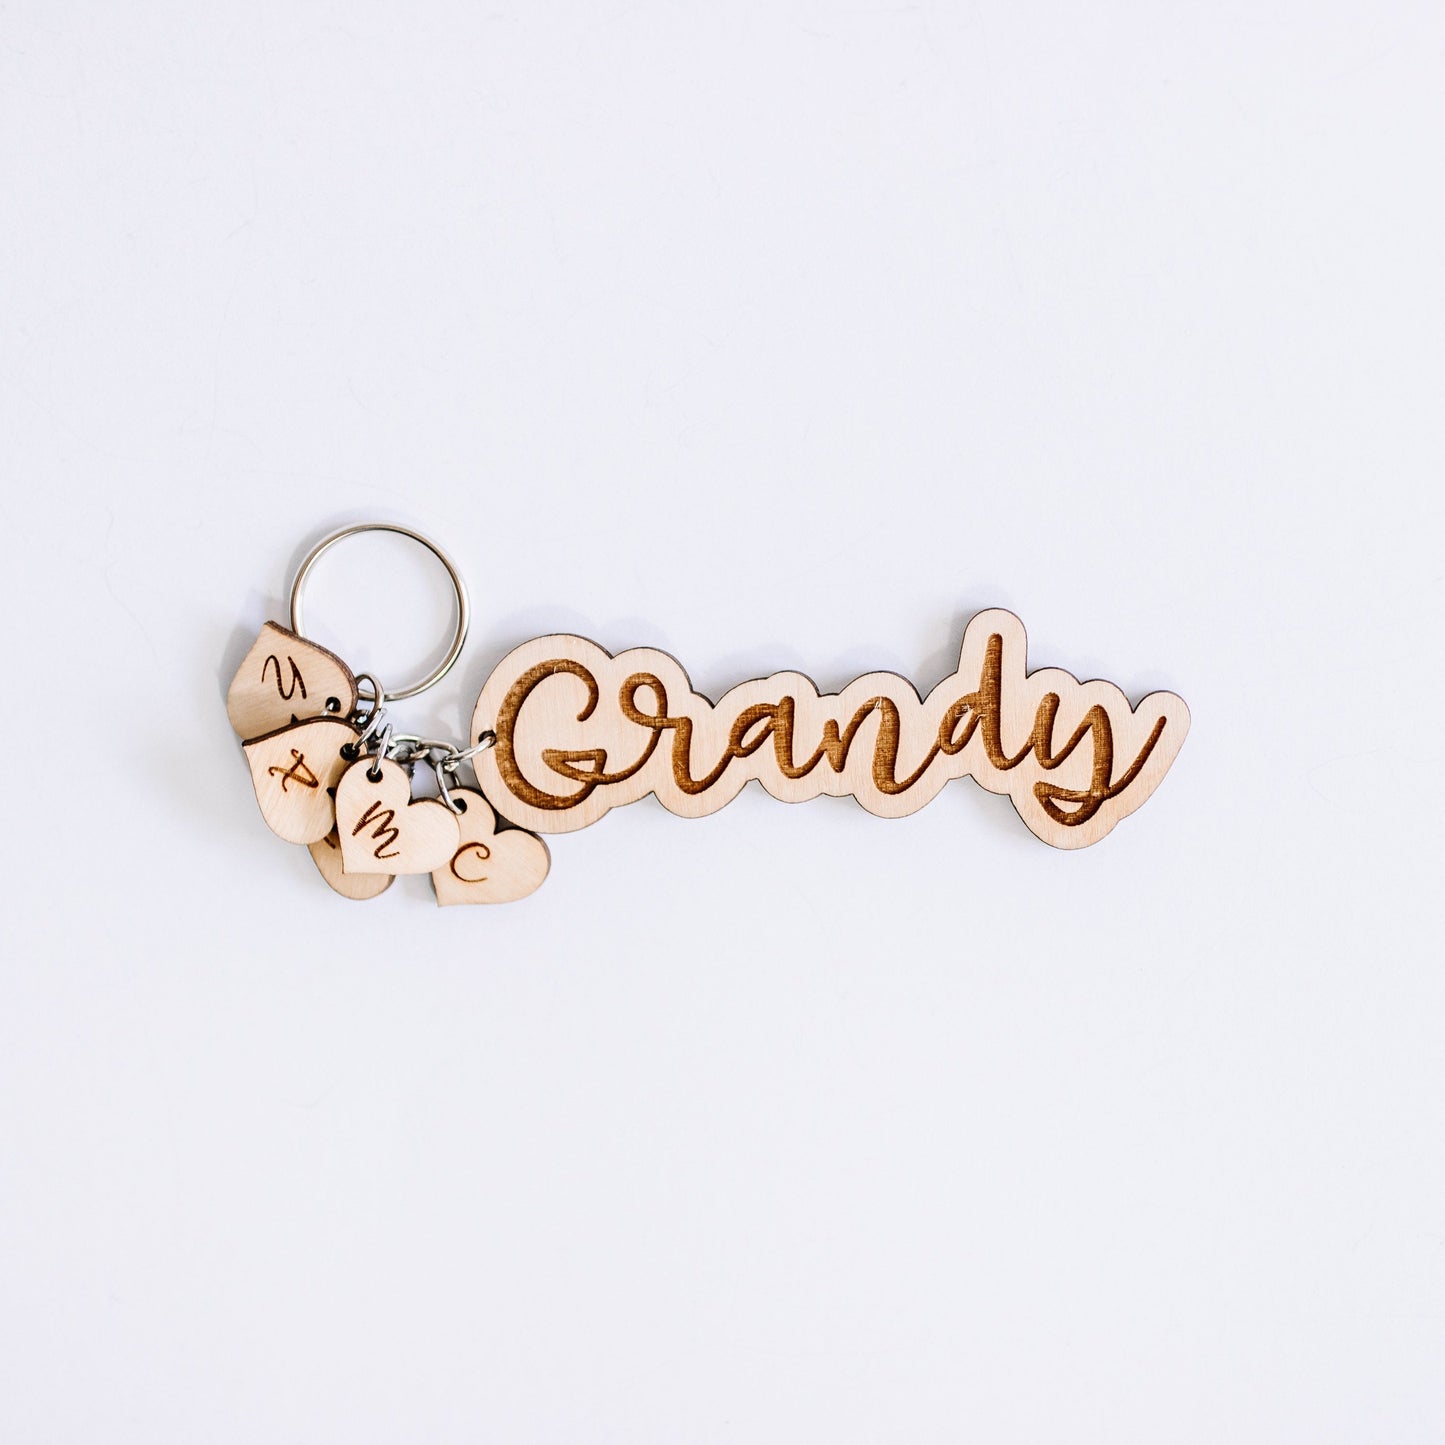 Grandy Wooden Initial Heart Keychain Gift For Grandma, Mother’s Day Wood Child Initial Heart Keychain Charms Gift For Grand Mother